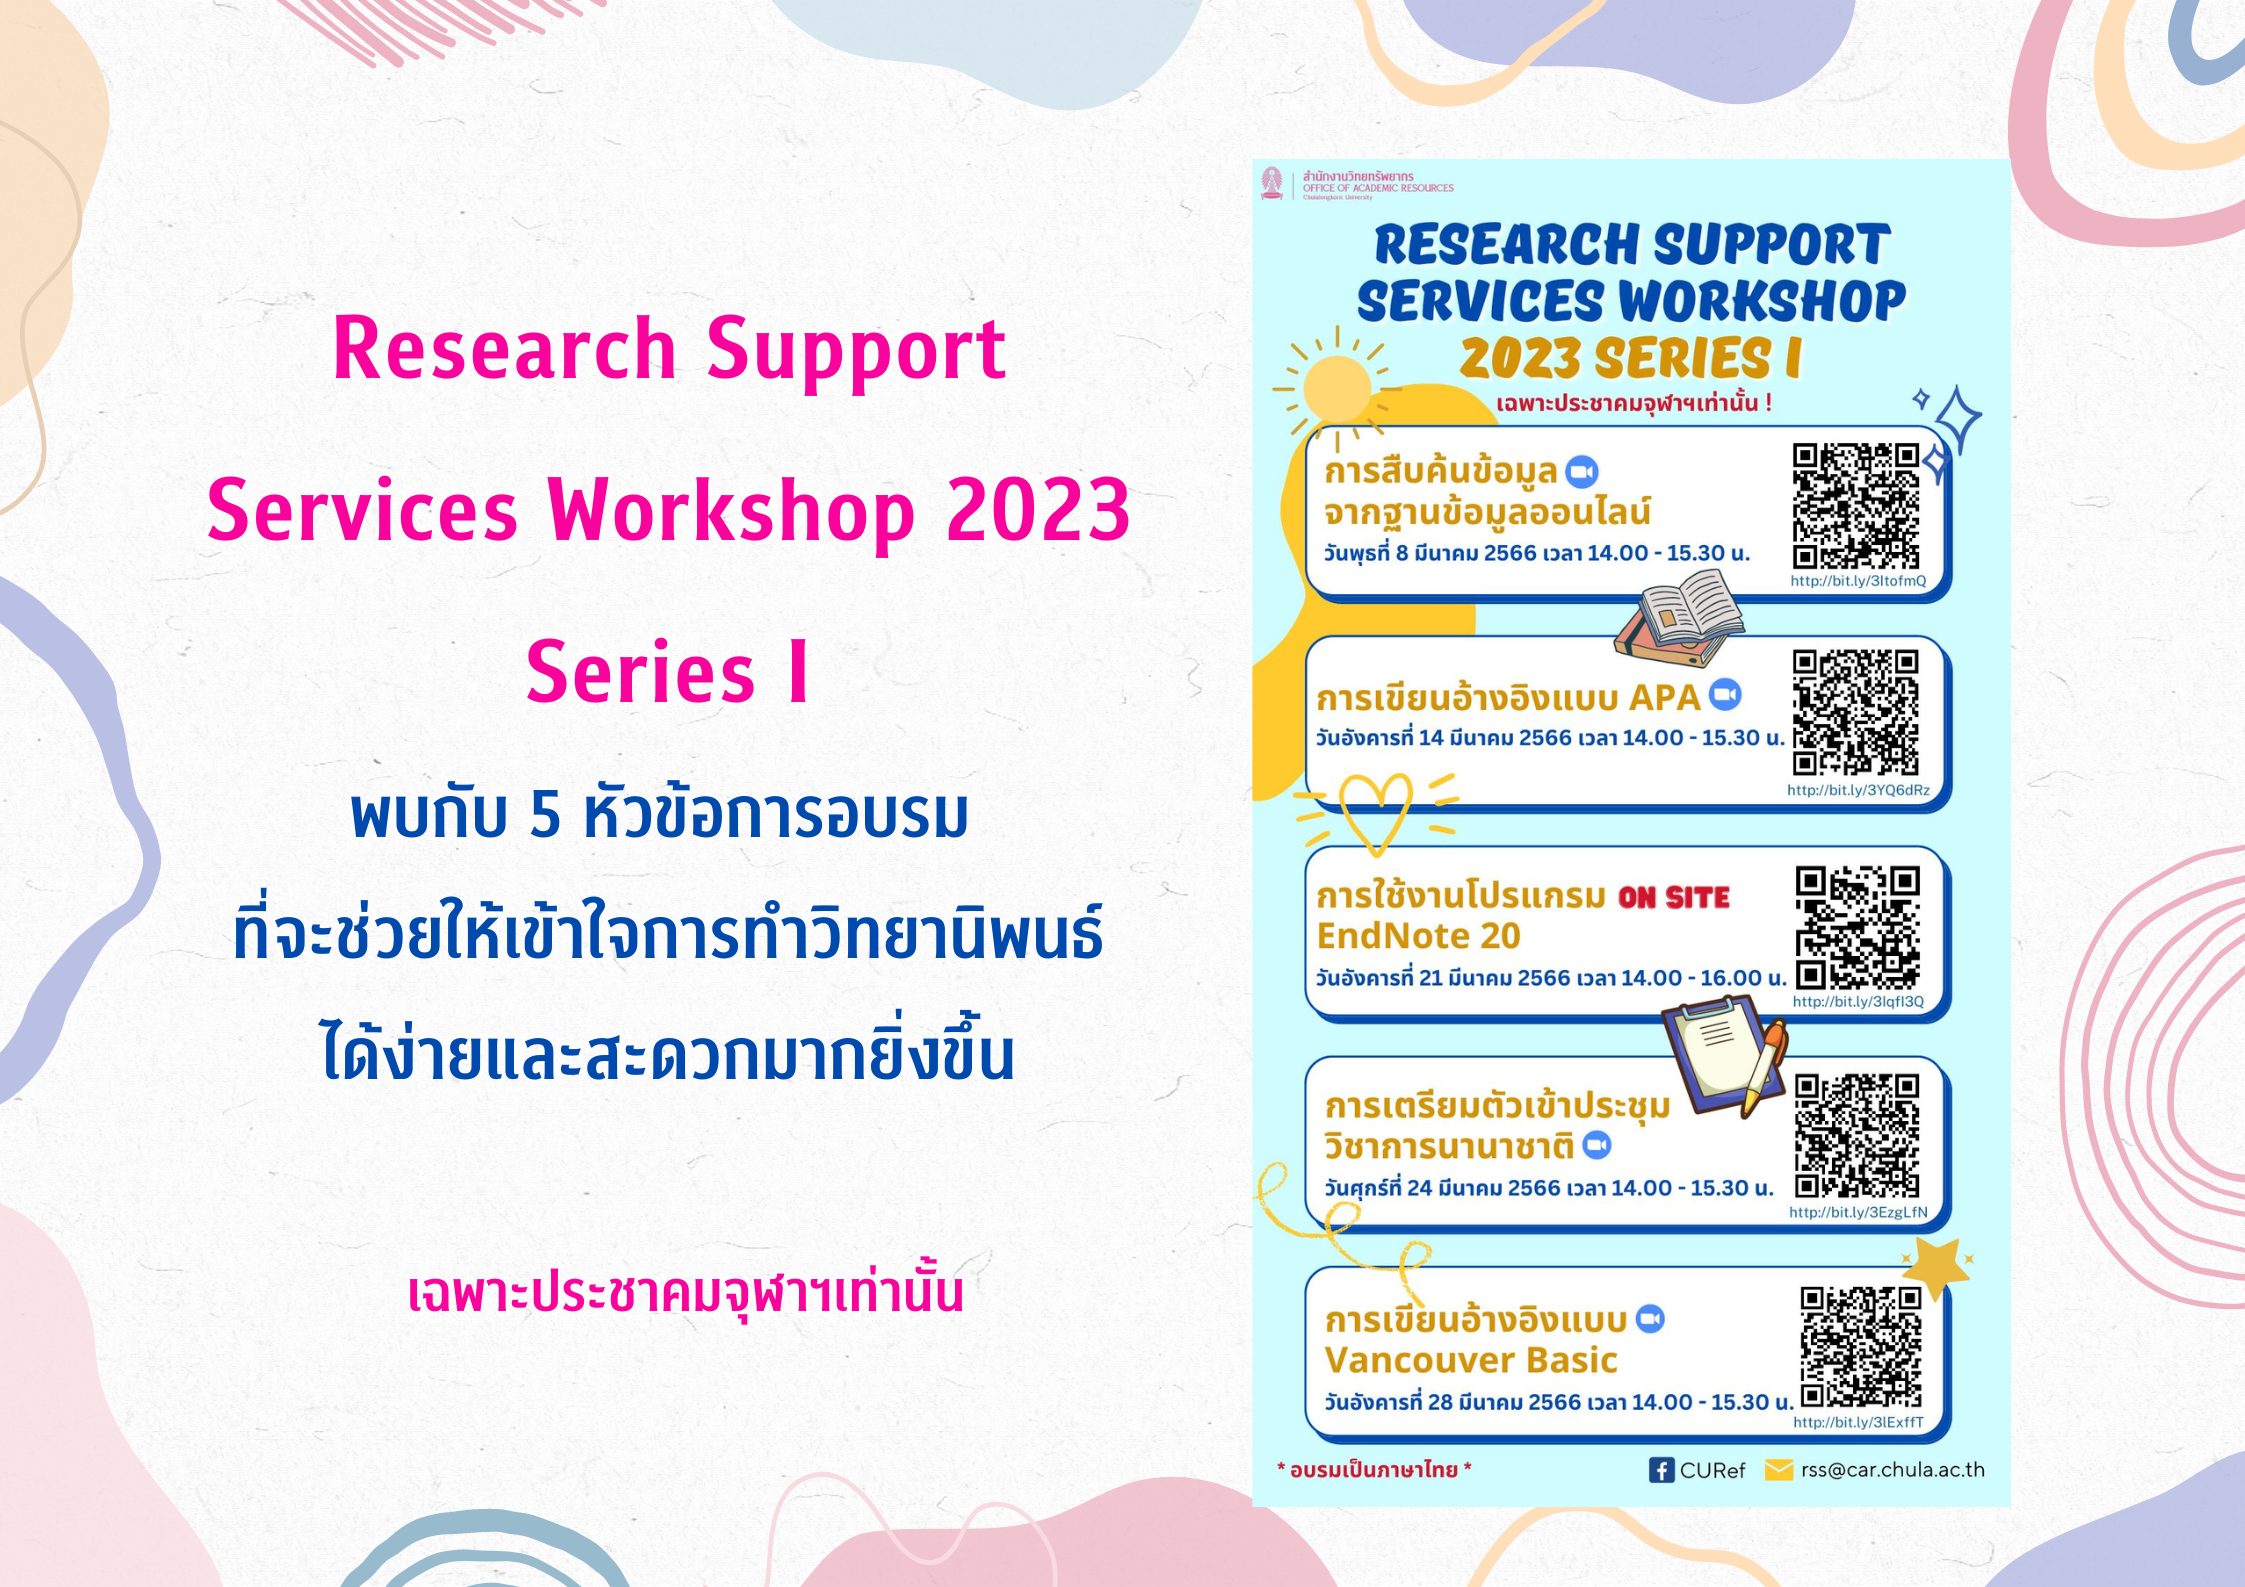 Research Support Services Workshop 2023 Series